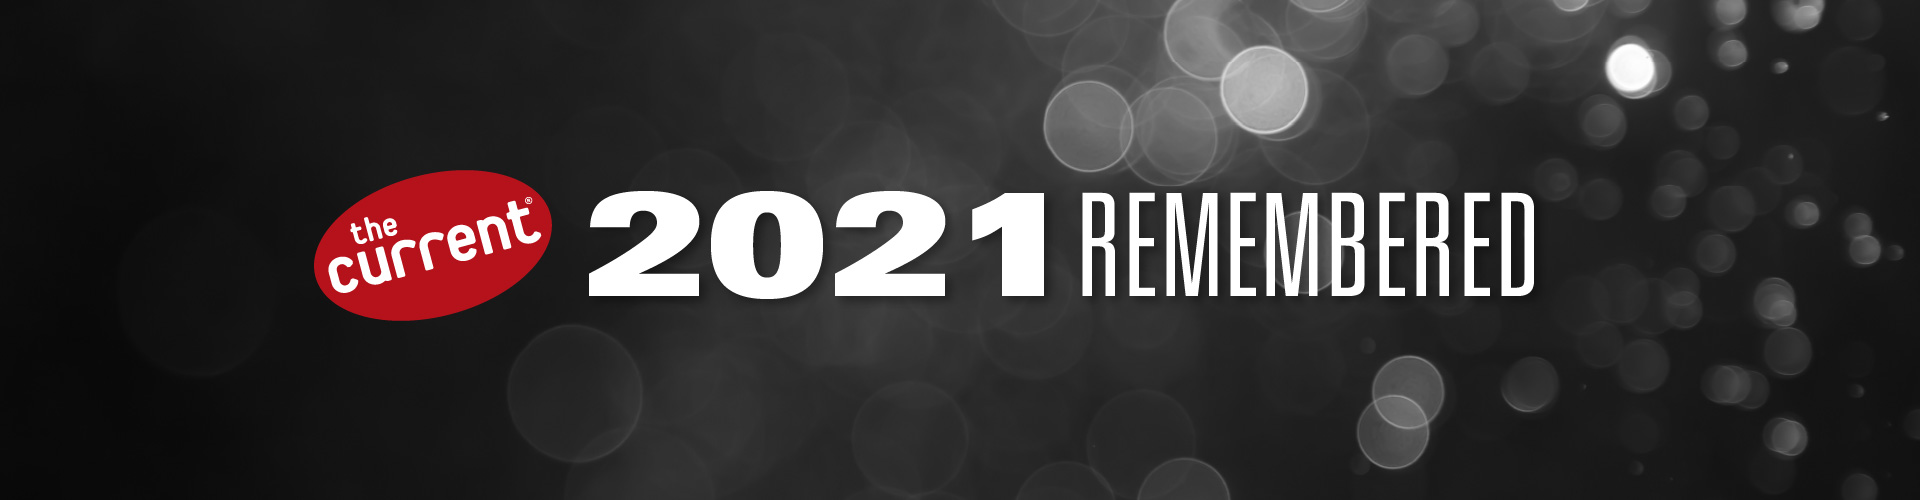 2021 Remembered from The Current